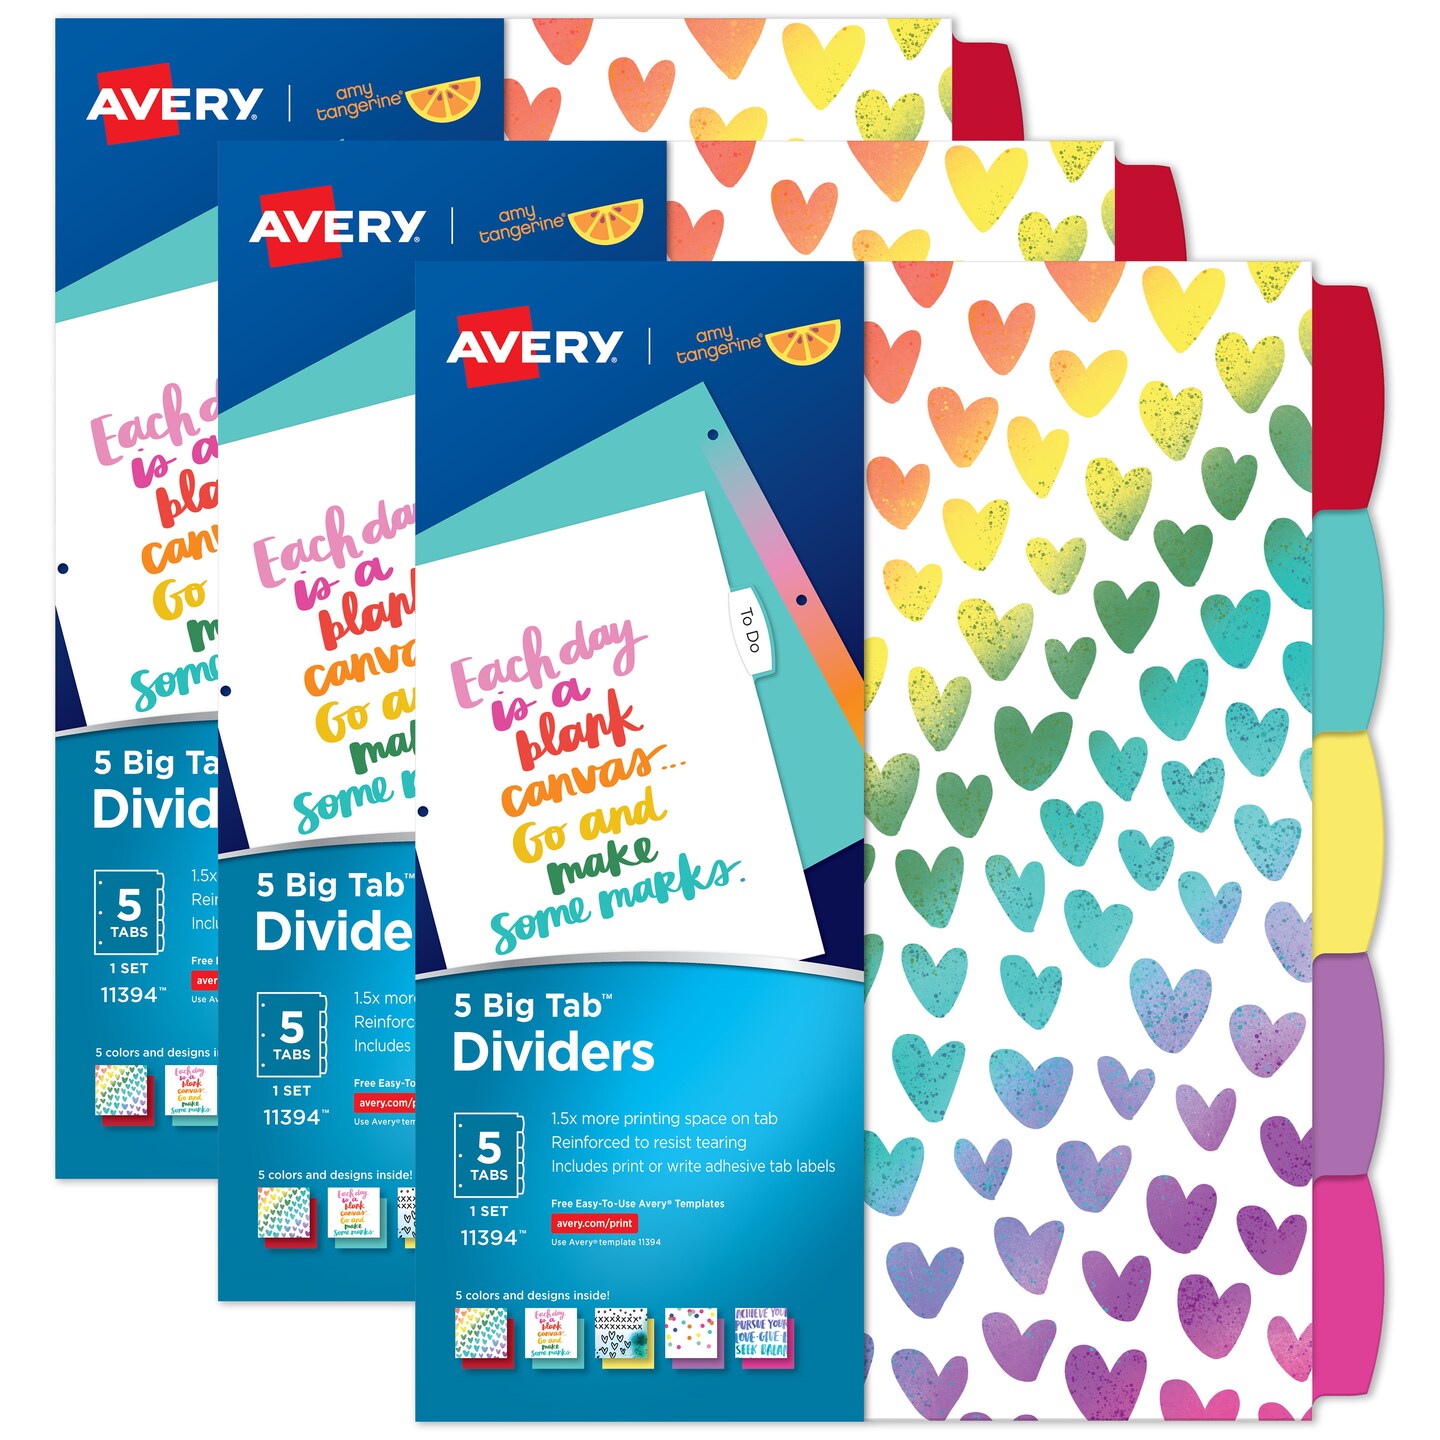 Avery + Amy Tangerine Designer Collection Big Tab Dividers for 3 Ring Binders, 5-Tab Sets, Rainbow Vibes, 3 Binder Divider Sets (01740)